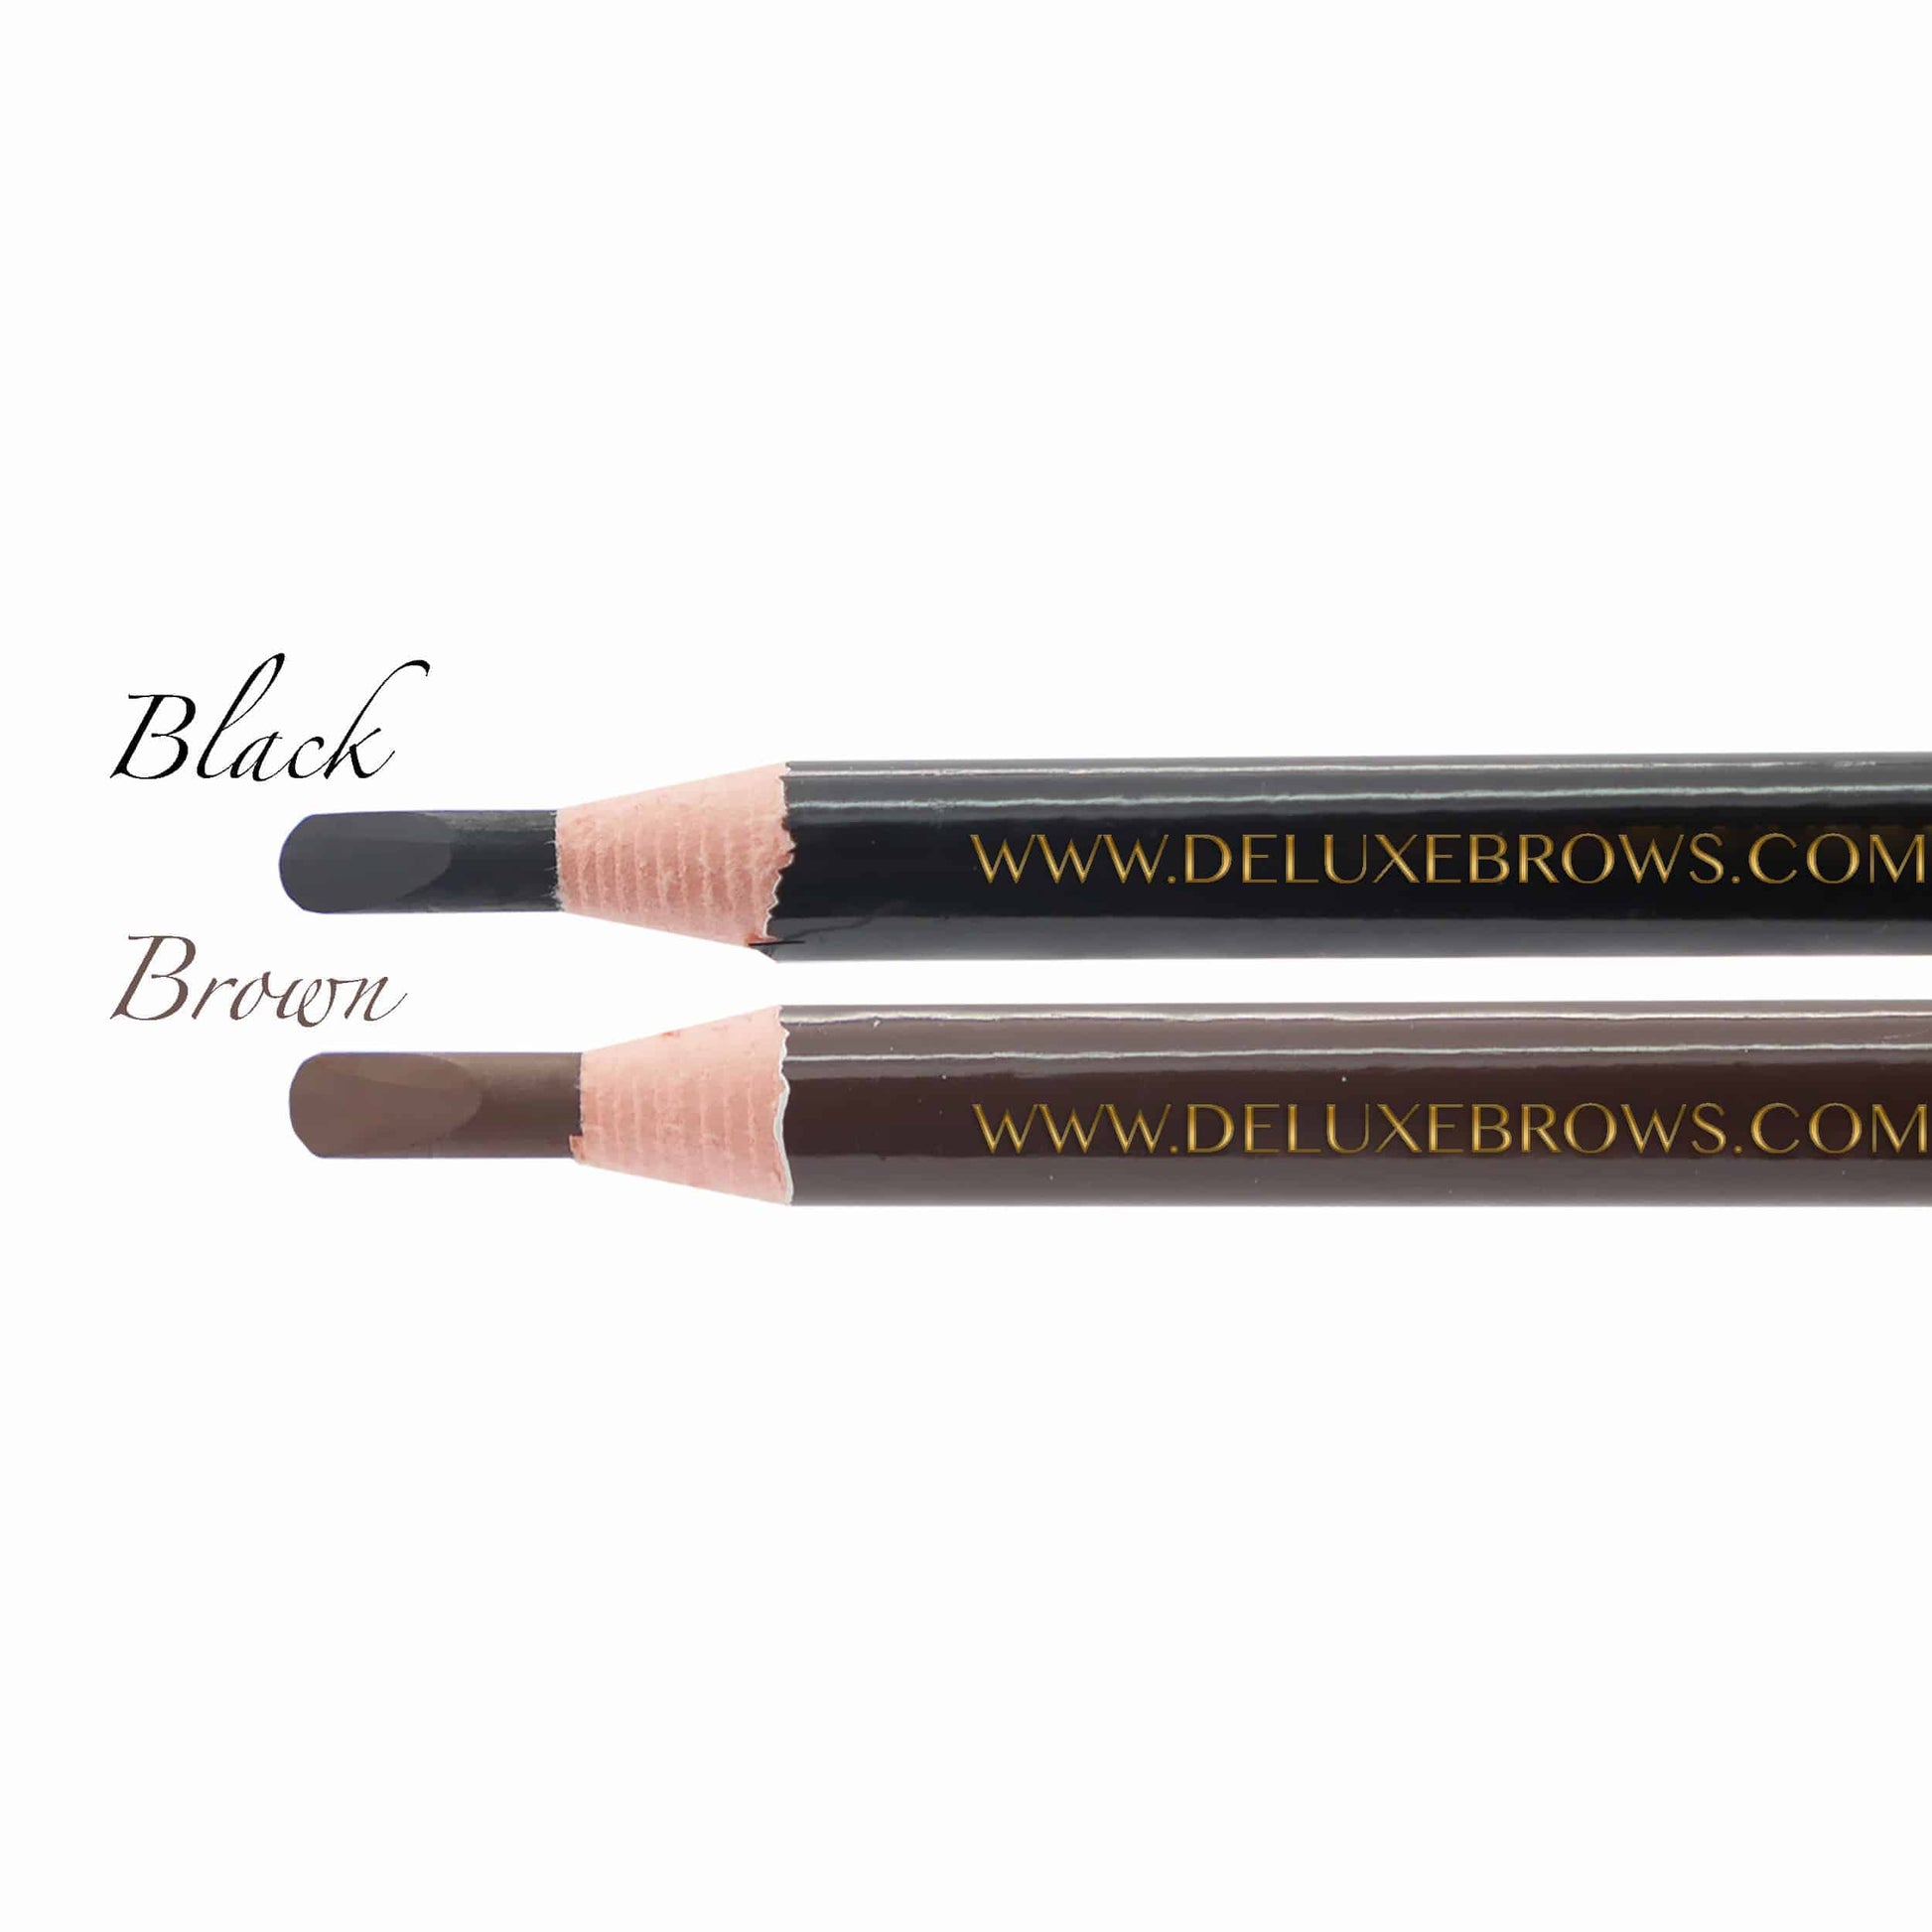 4 x Deluxe Brows® Hard Brow Mapping Pencils